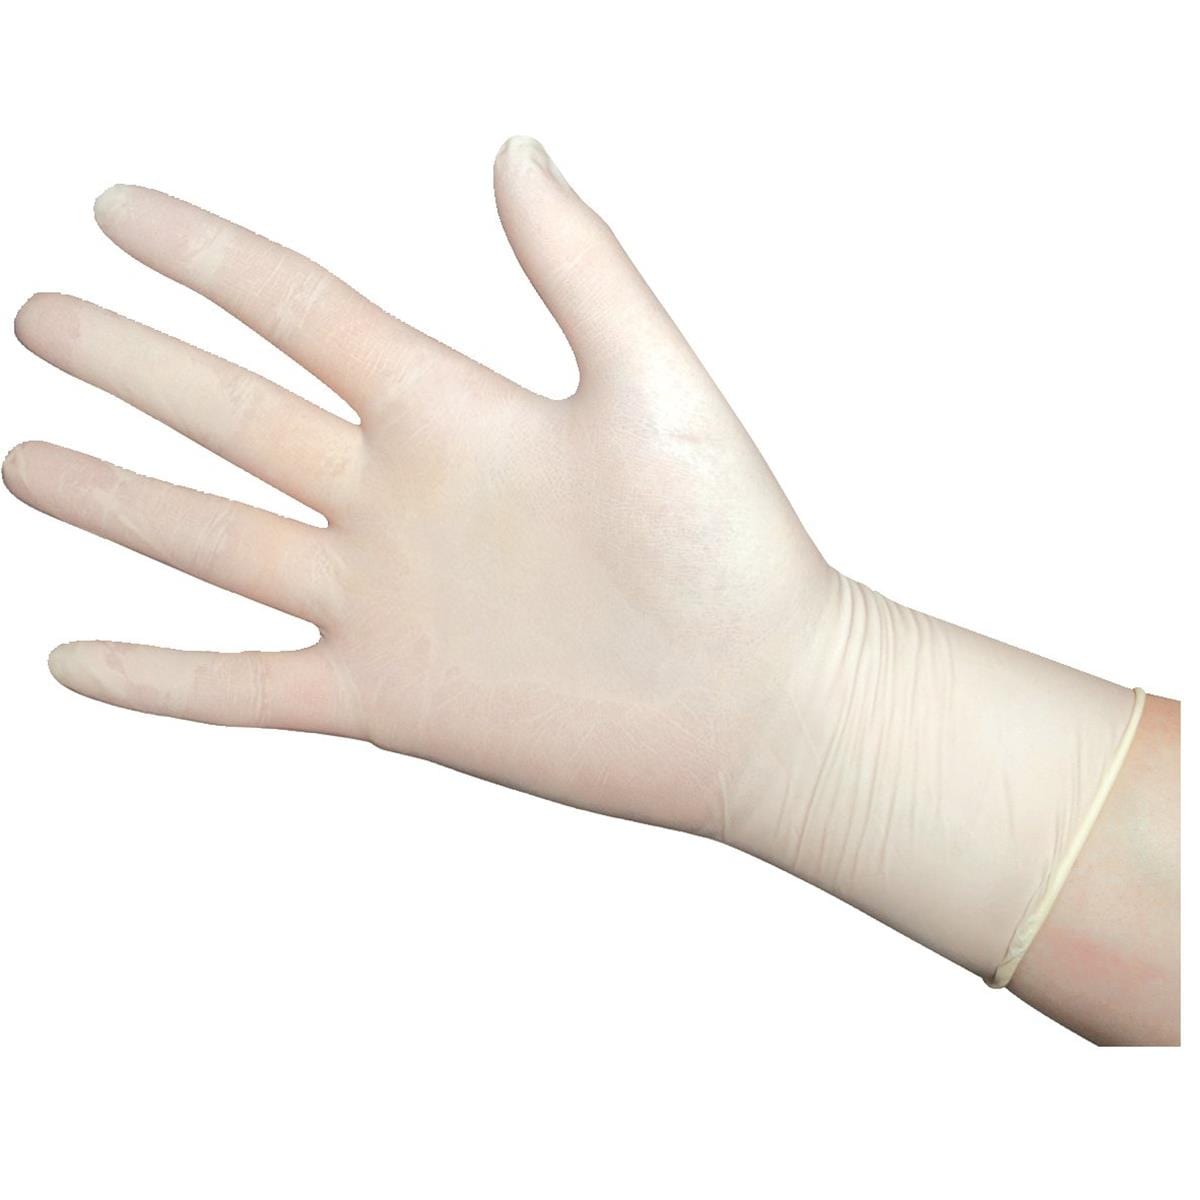 Gemplers 5-mil Powdered Latex Disposable Gloves, Bag of 500